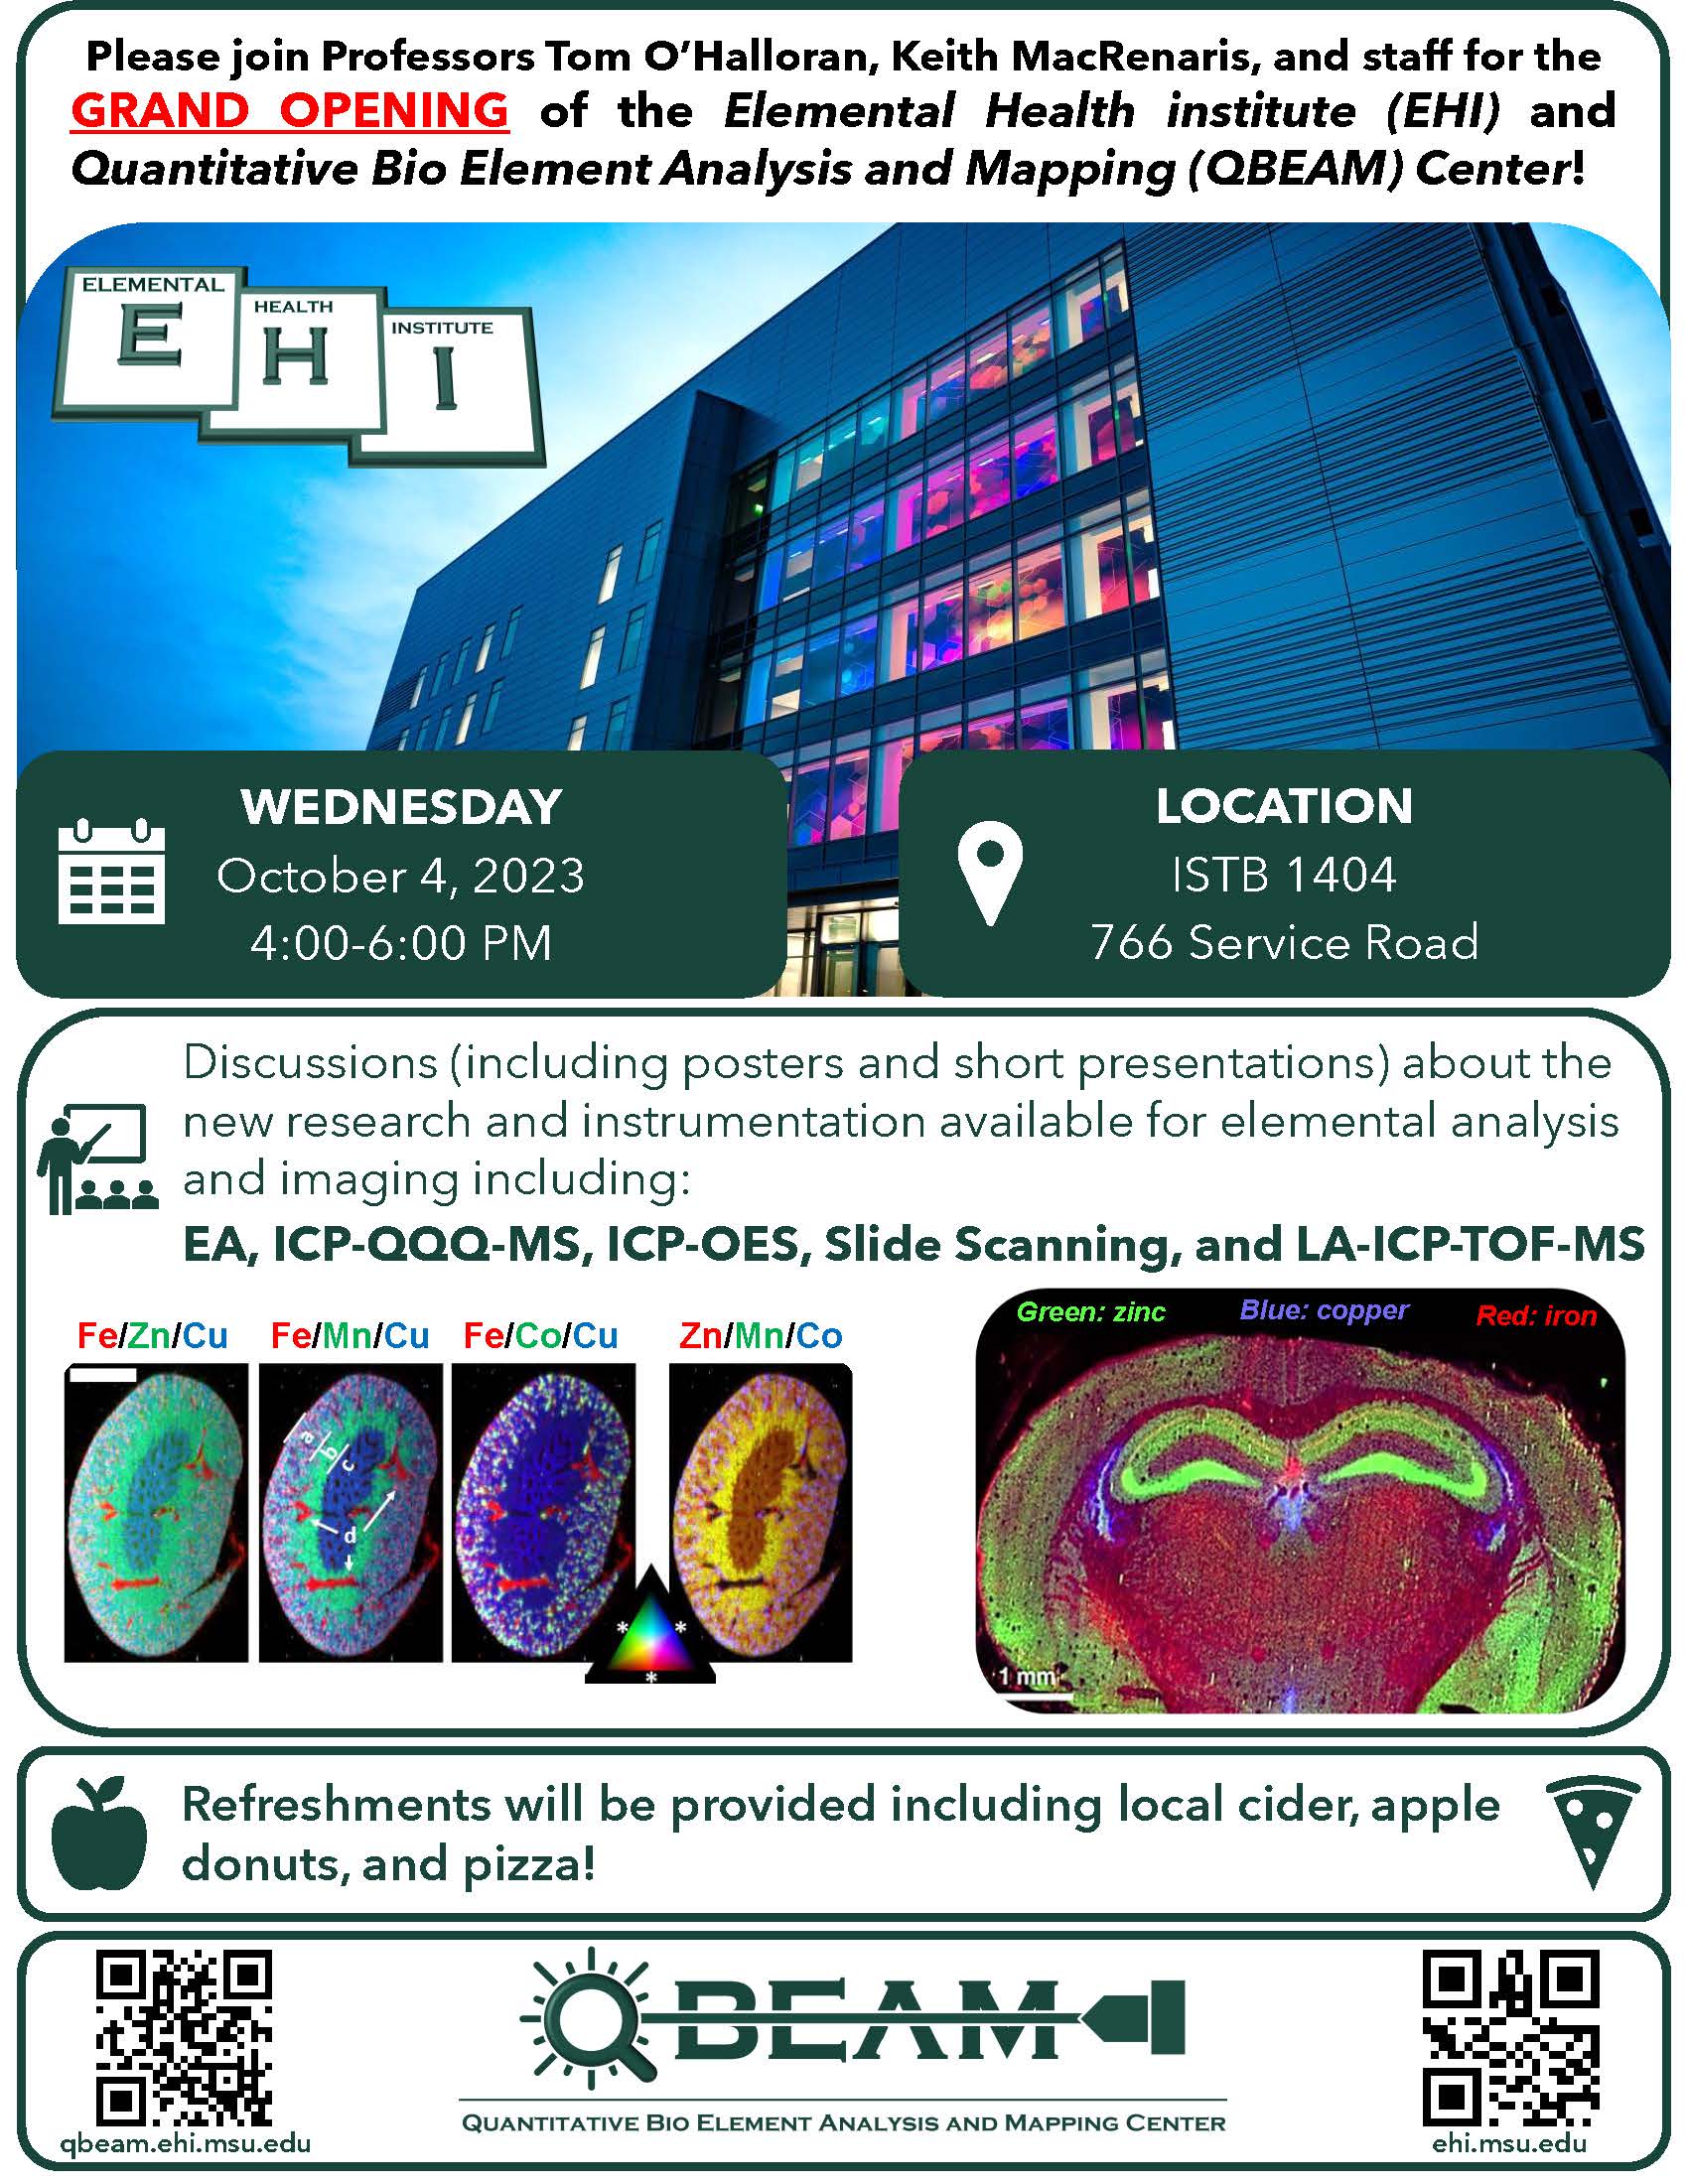 Grand opening of Elemental Health Institute and QBEAM center, October 4, 2023, 4:00-6:00 PM, ISTB Building 